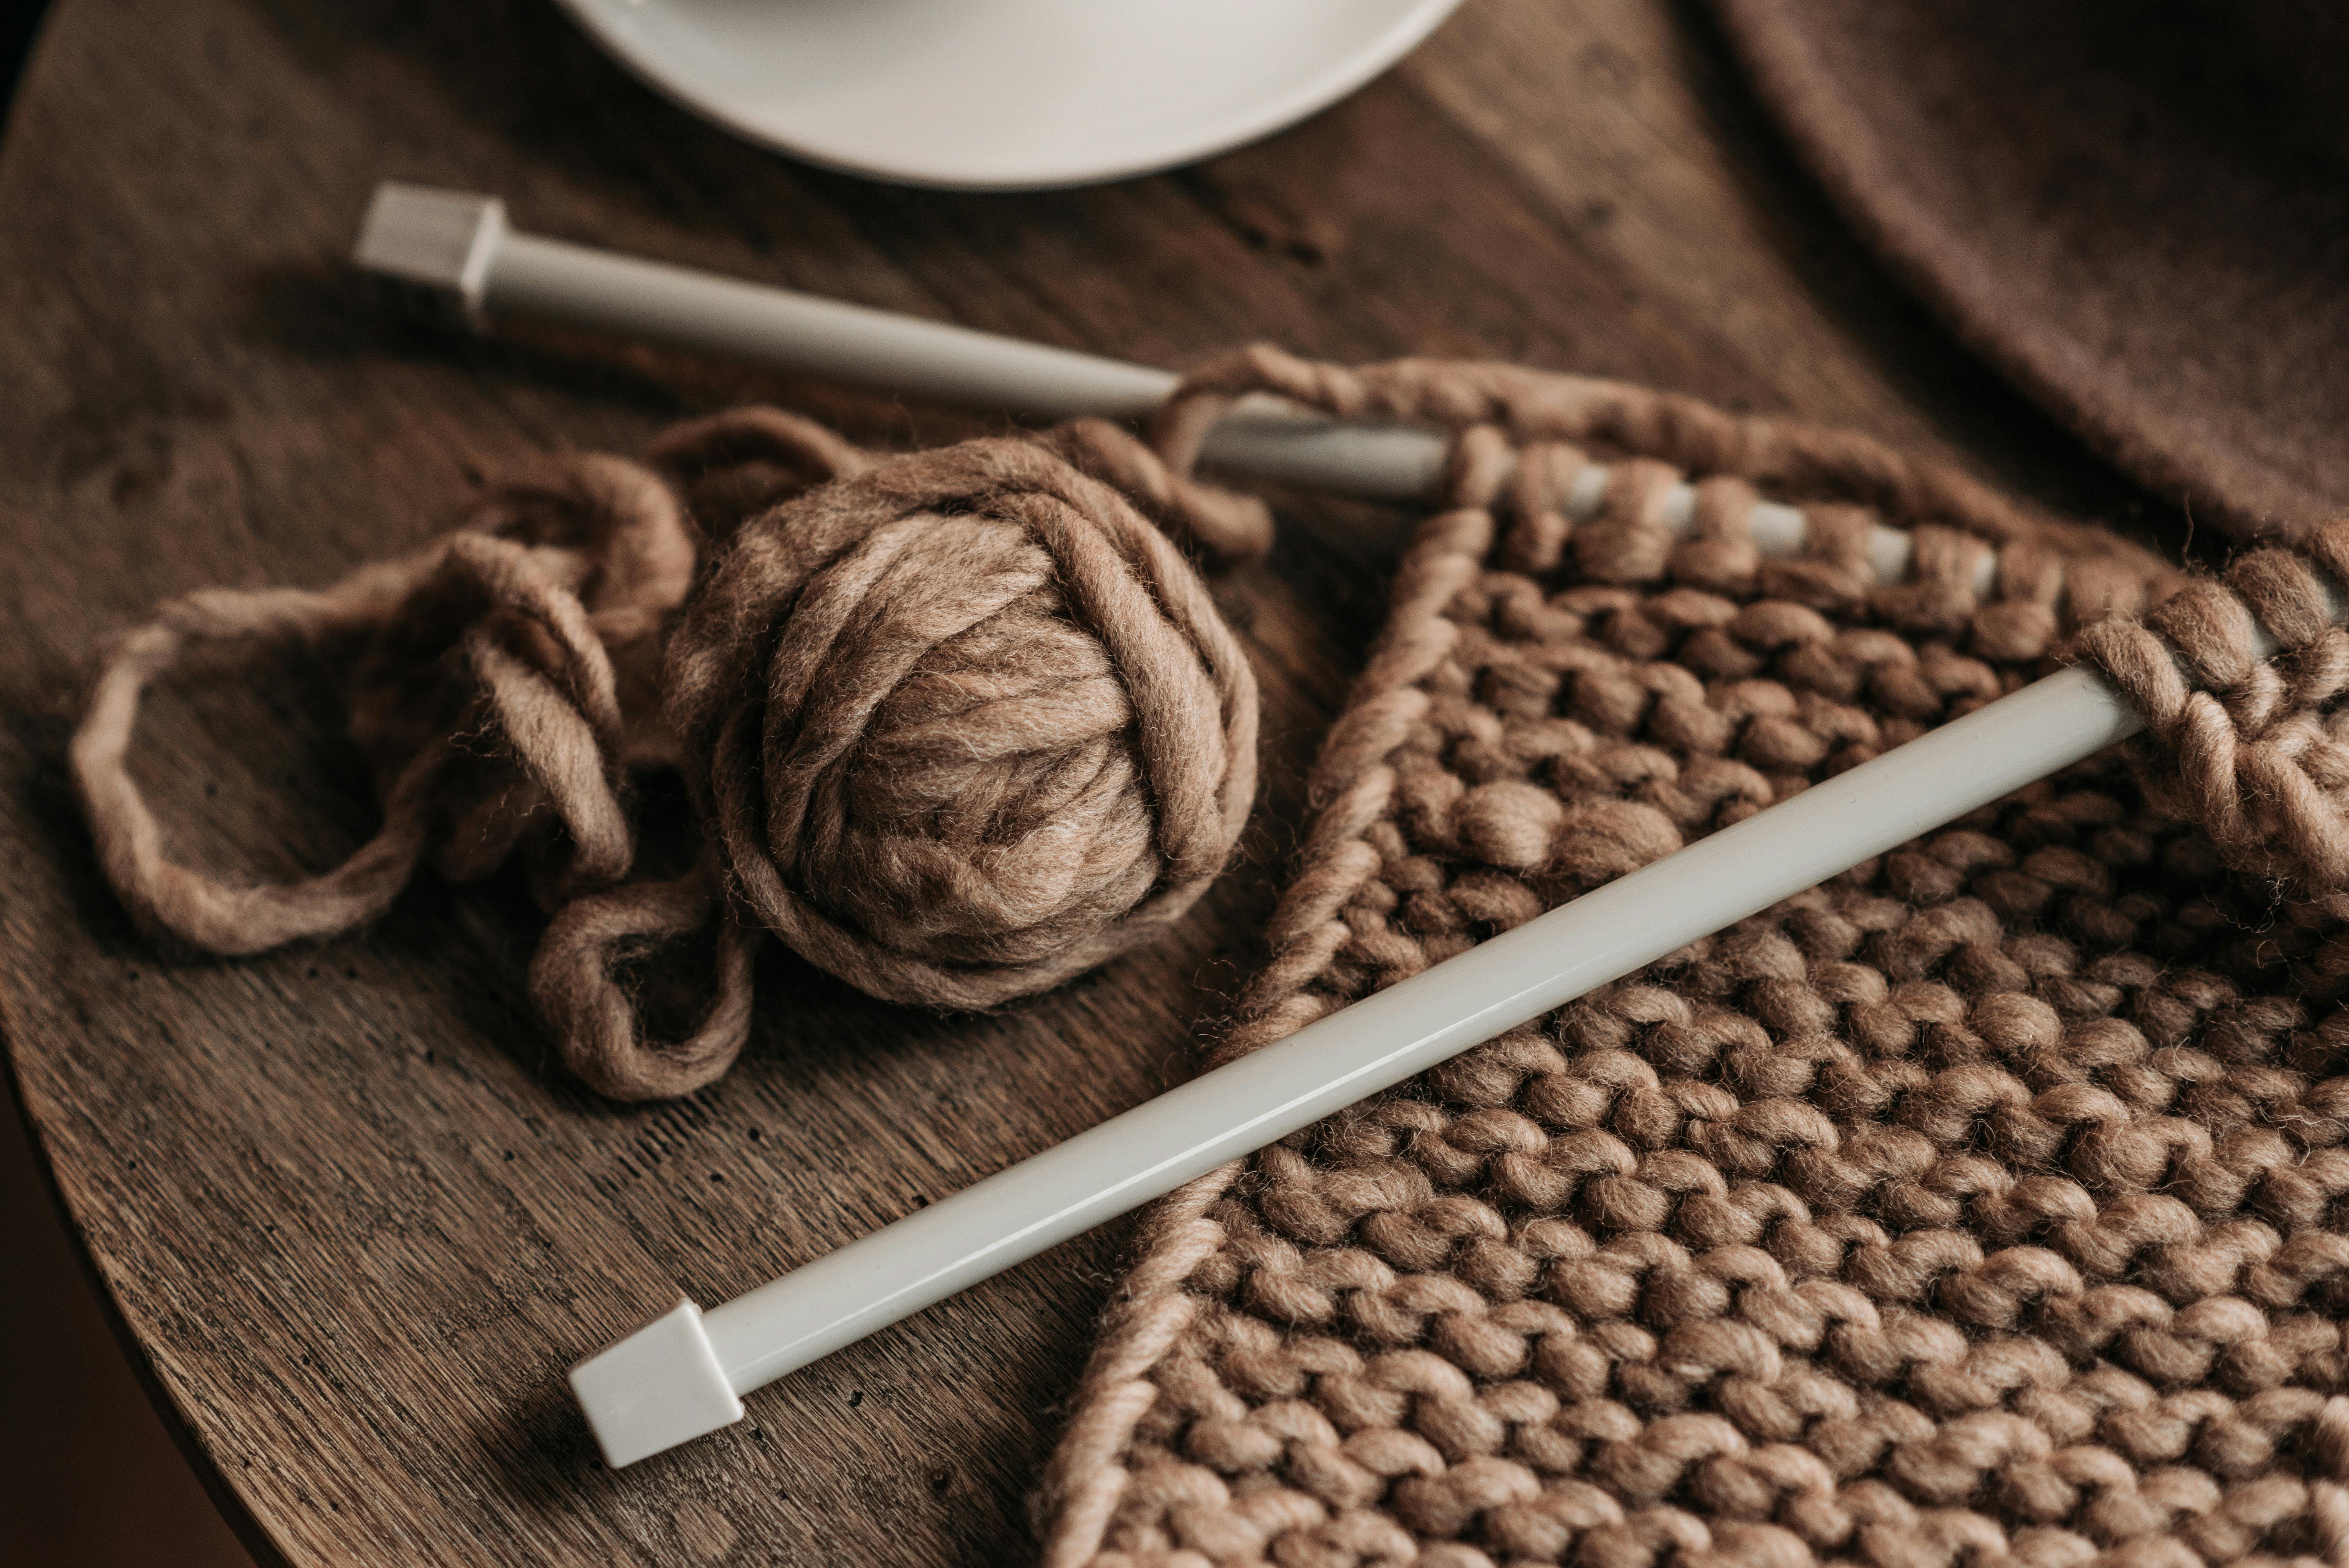 Natural Yarn And Wooden Knitting Needles On Chair by Stocksy